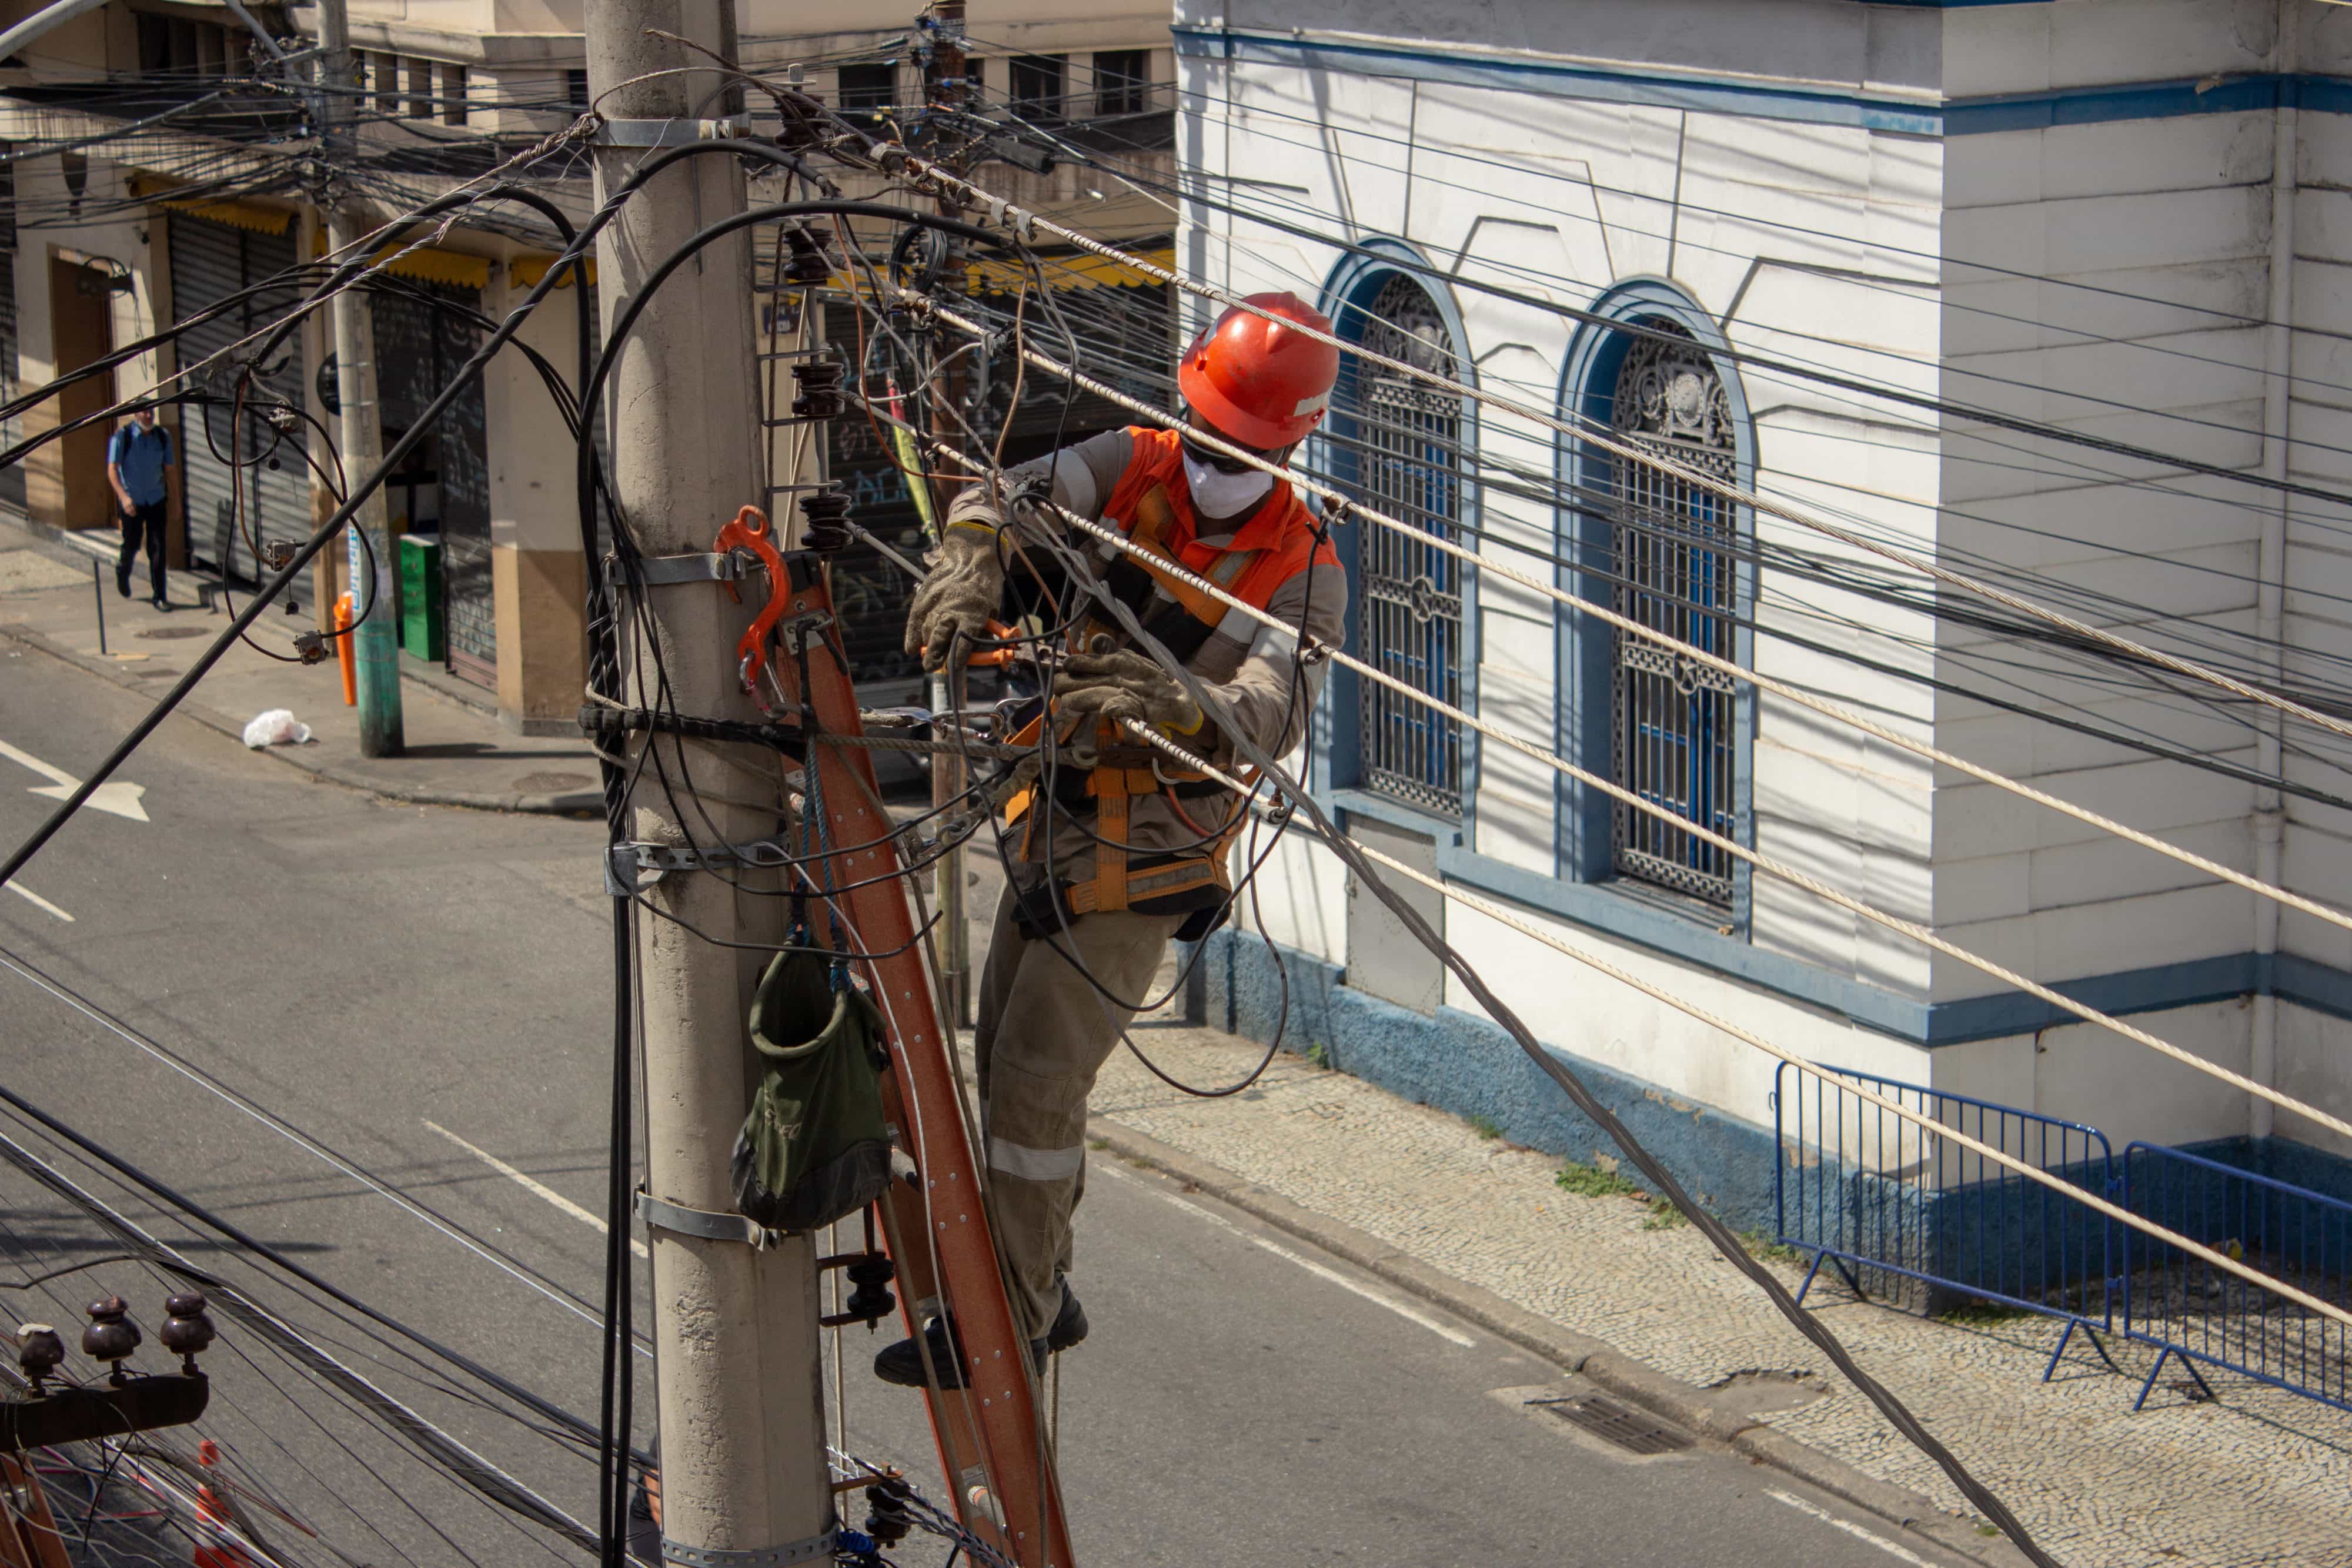 Men repairing electrical grid wires using masks because of COVID-19